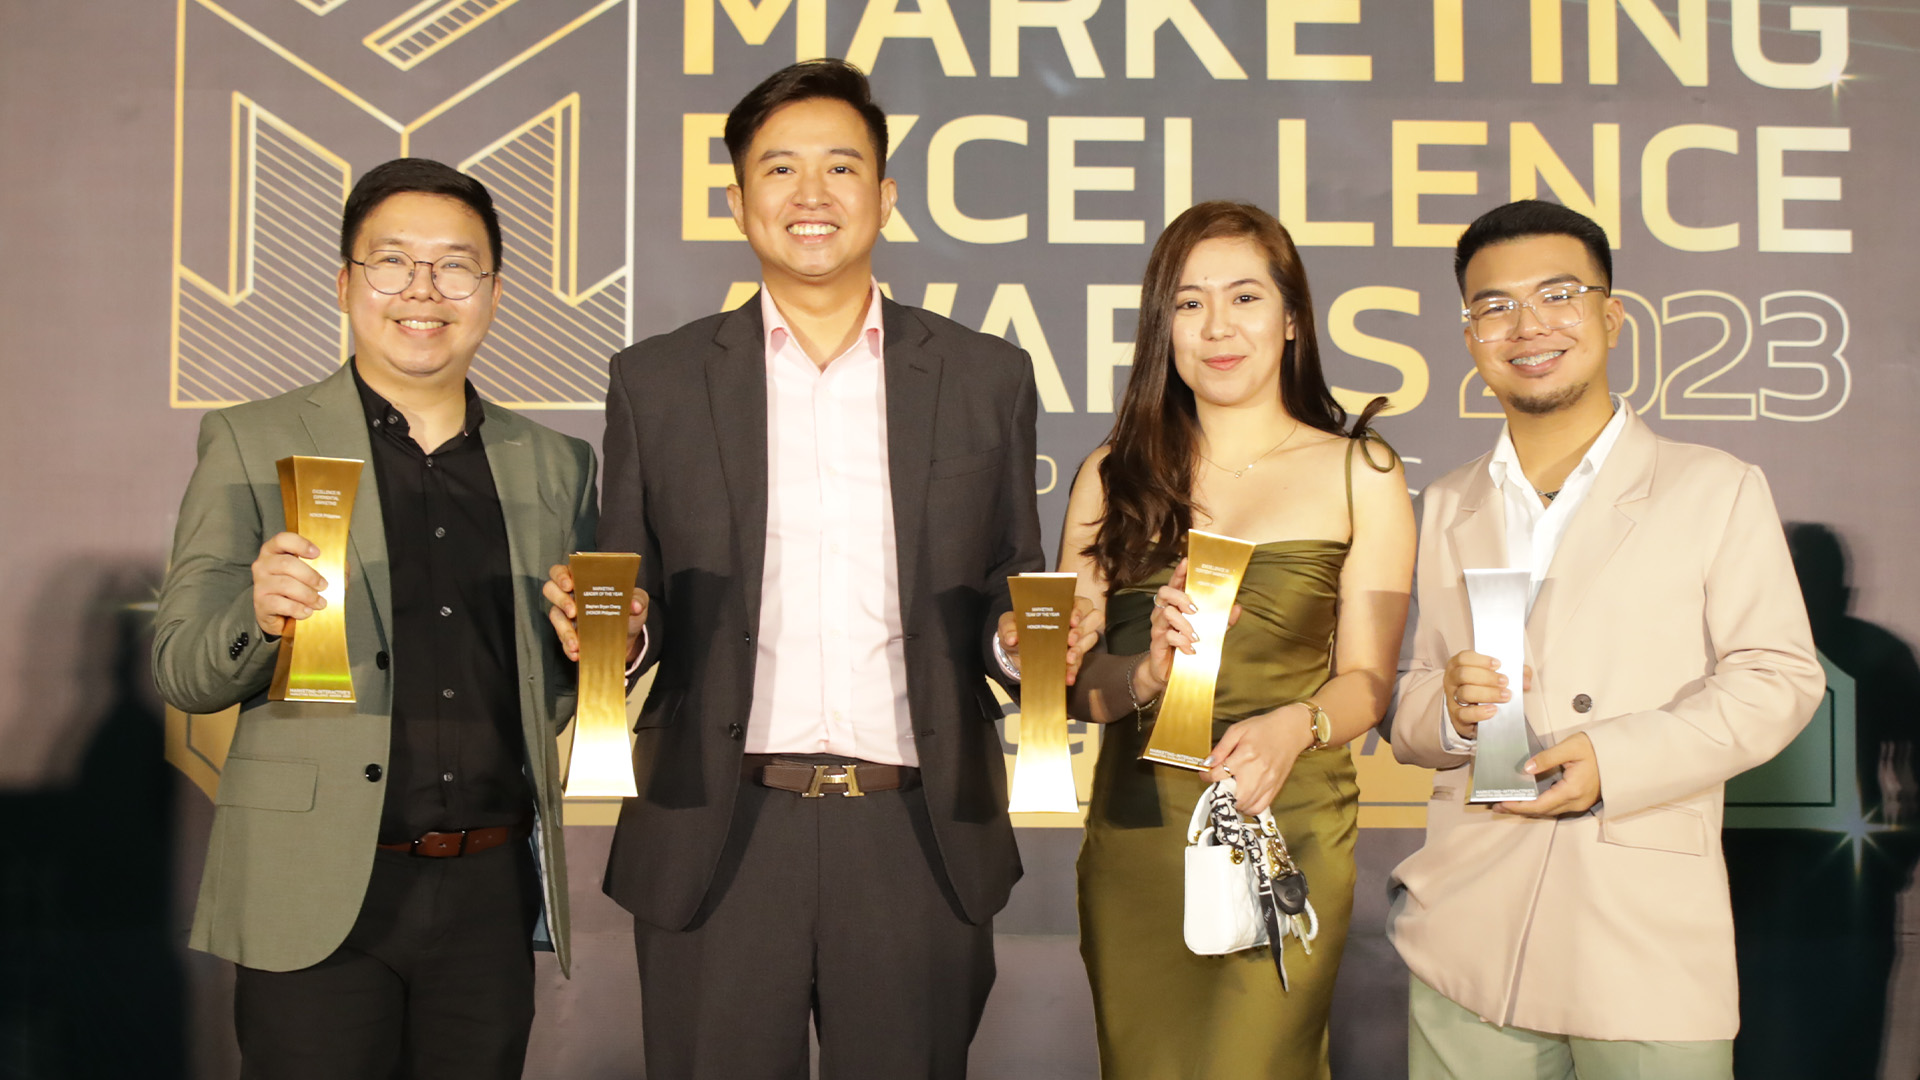 HONOR PH bags 1 Silver, 4 Gold Awards at the Marketing Excellence Awards 2023